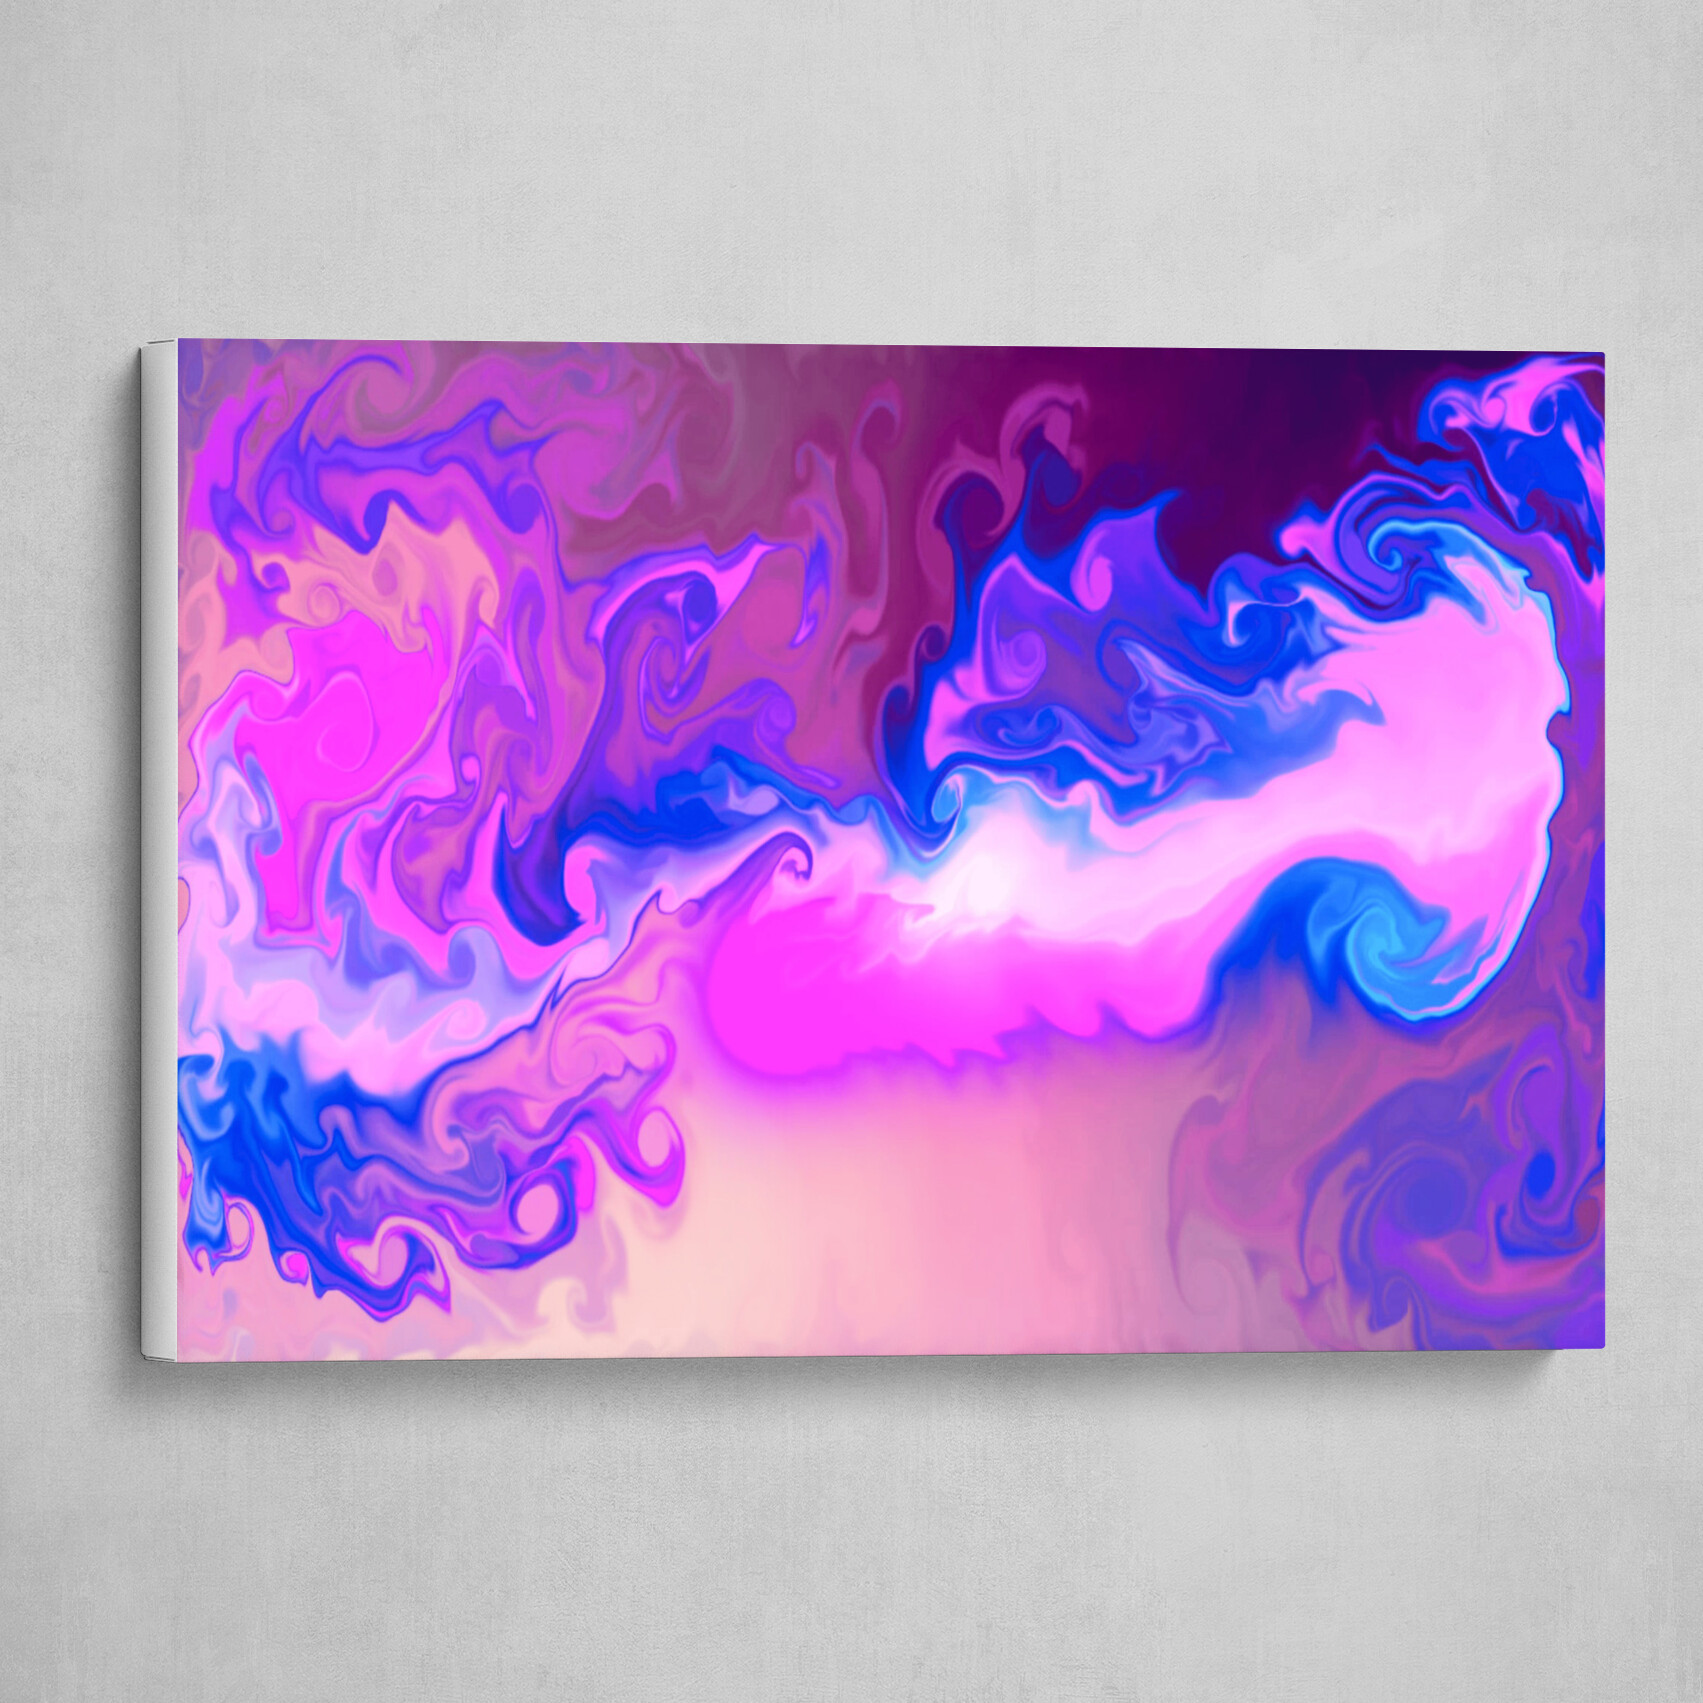 Violet Visions in Azure abstract 2